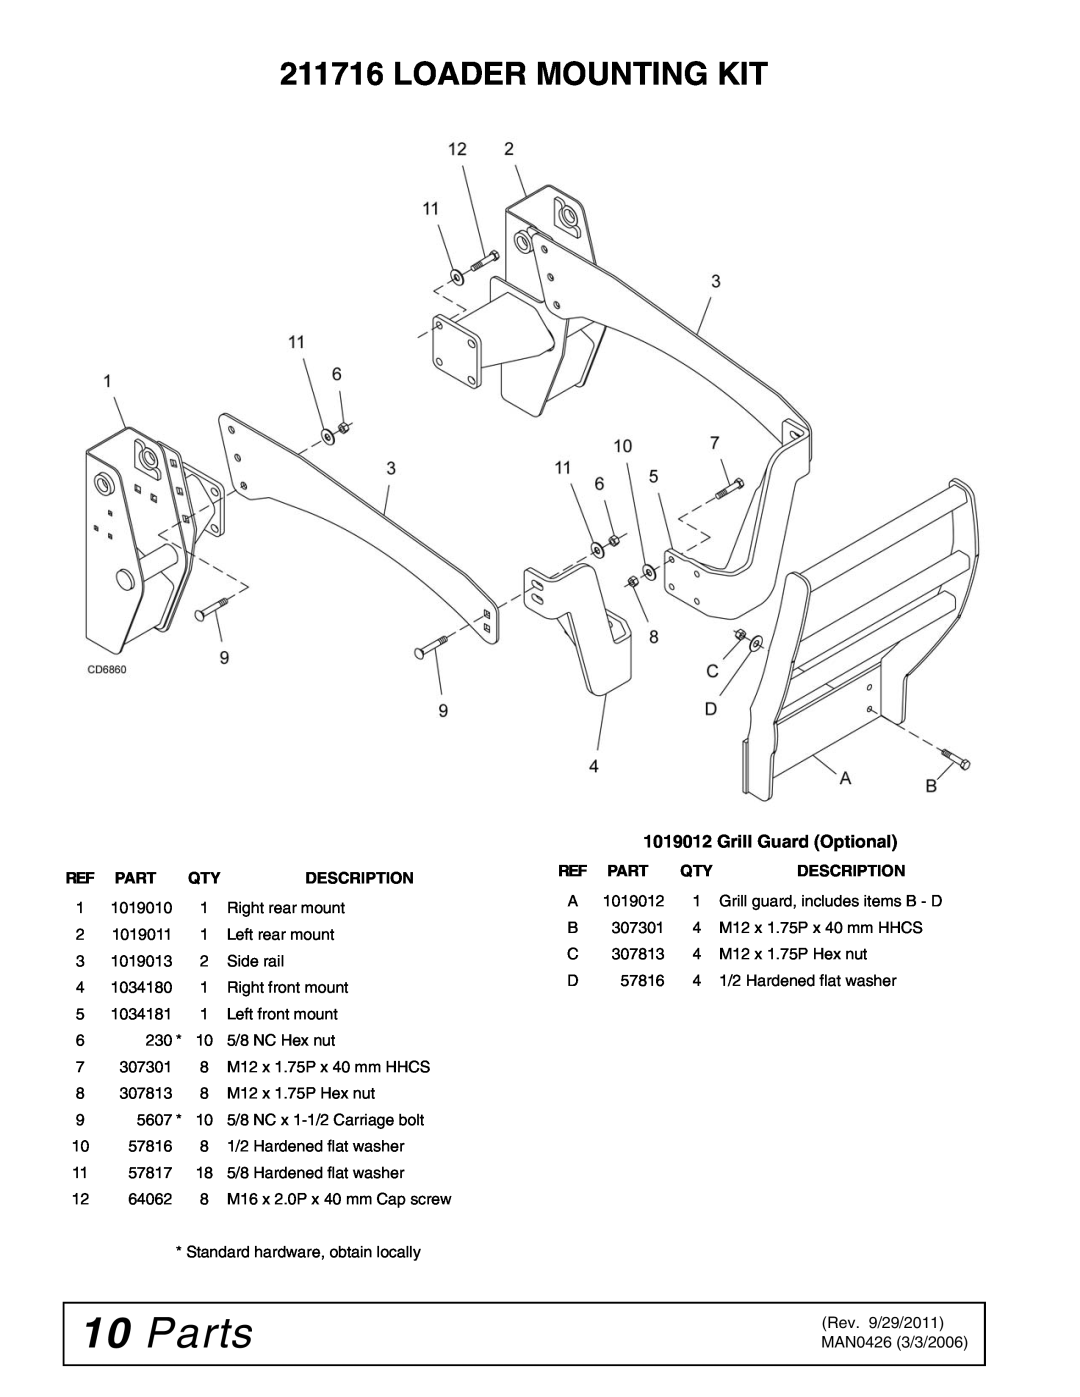 Woods Equipment 211716 installation manual 10Parts, Loader Mounting Kit, Grill Guard Optional 